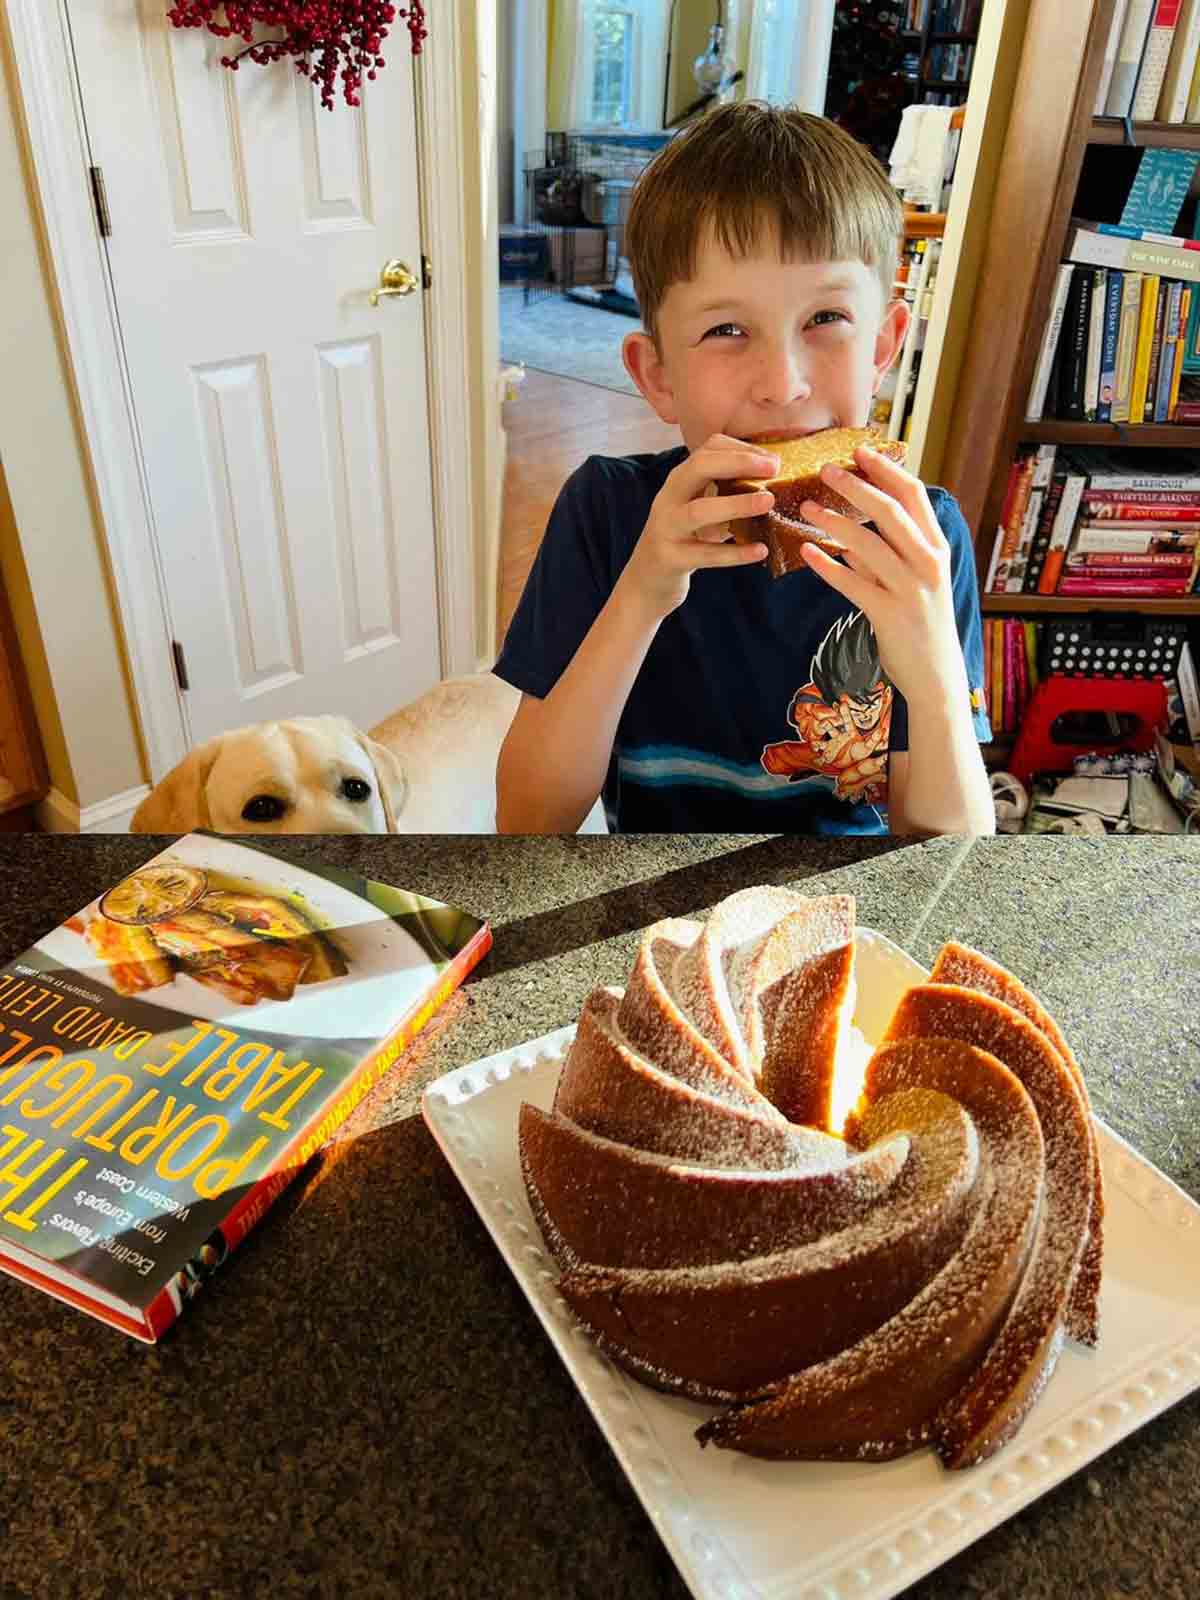 A young boy eating a slice of Portuguese olive oil cake, his dog nearby